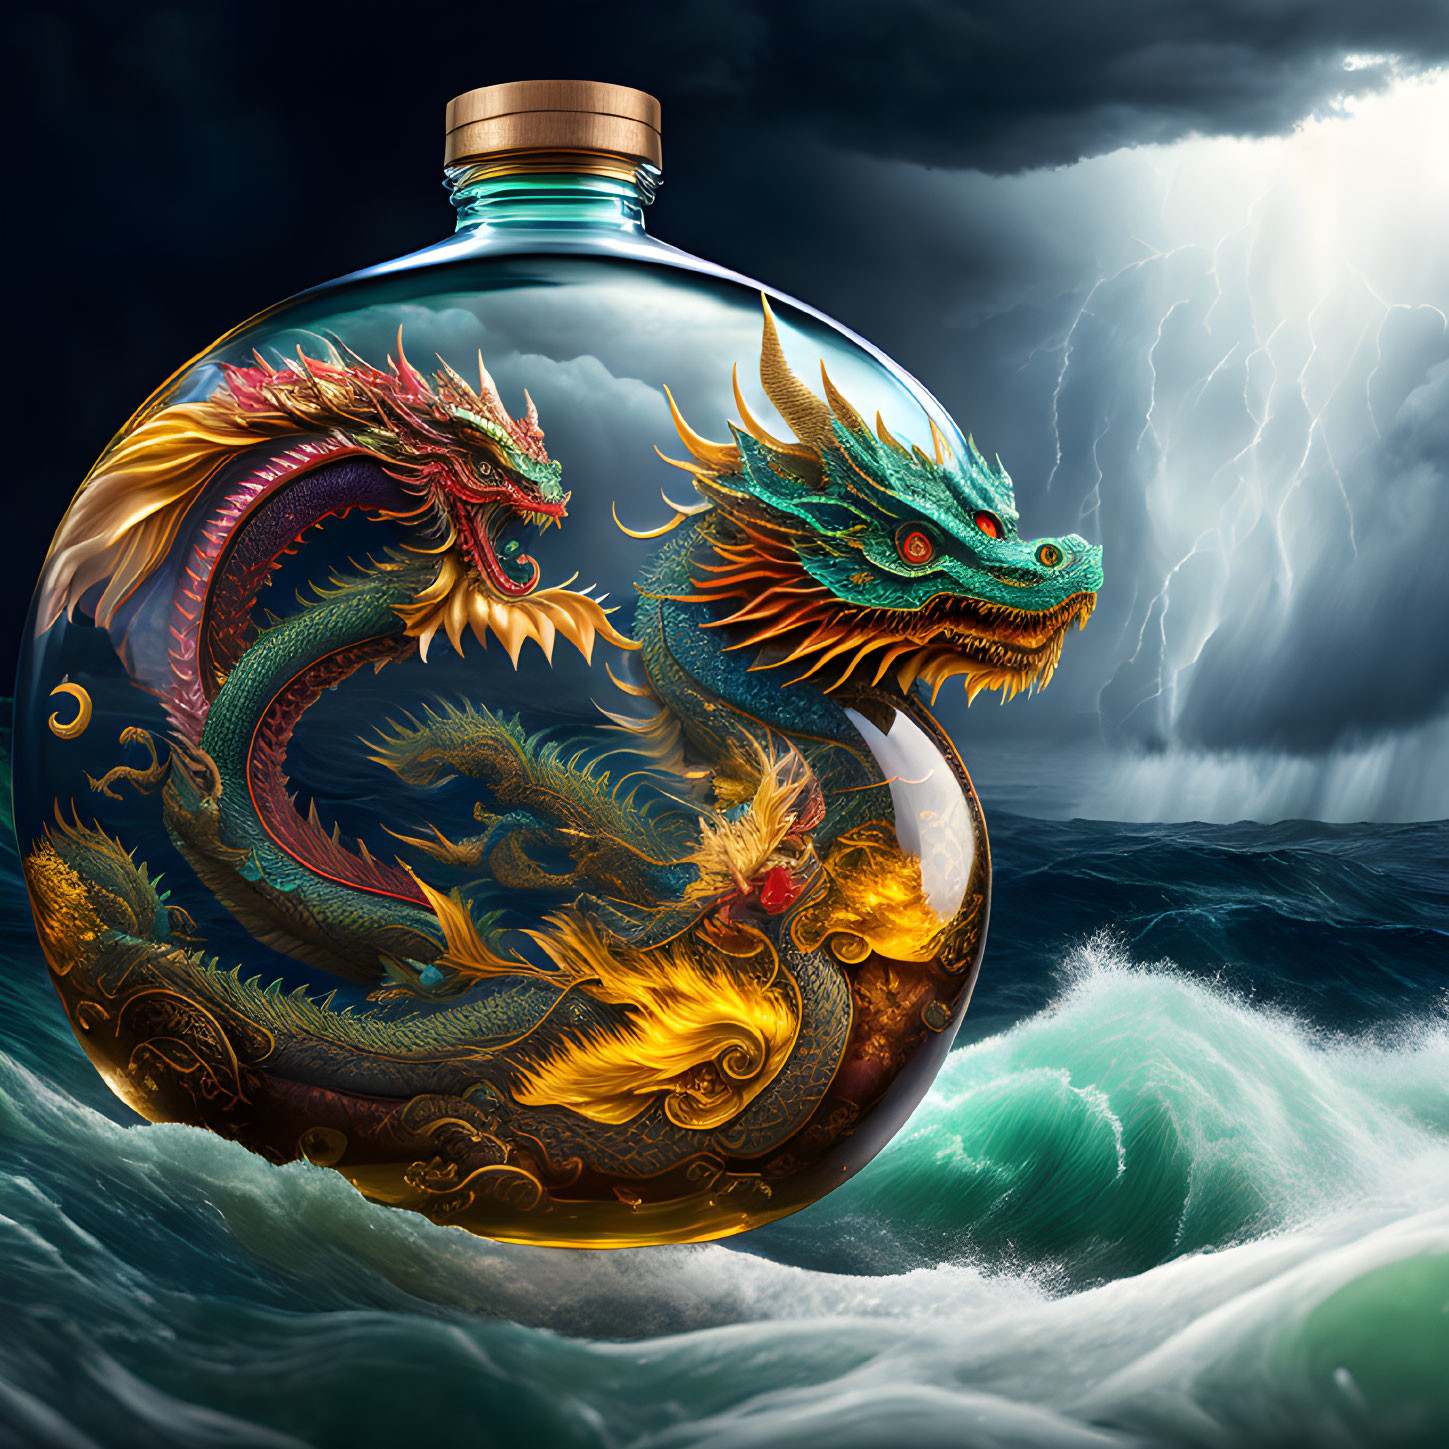 Dragons in a bottle in the storm